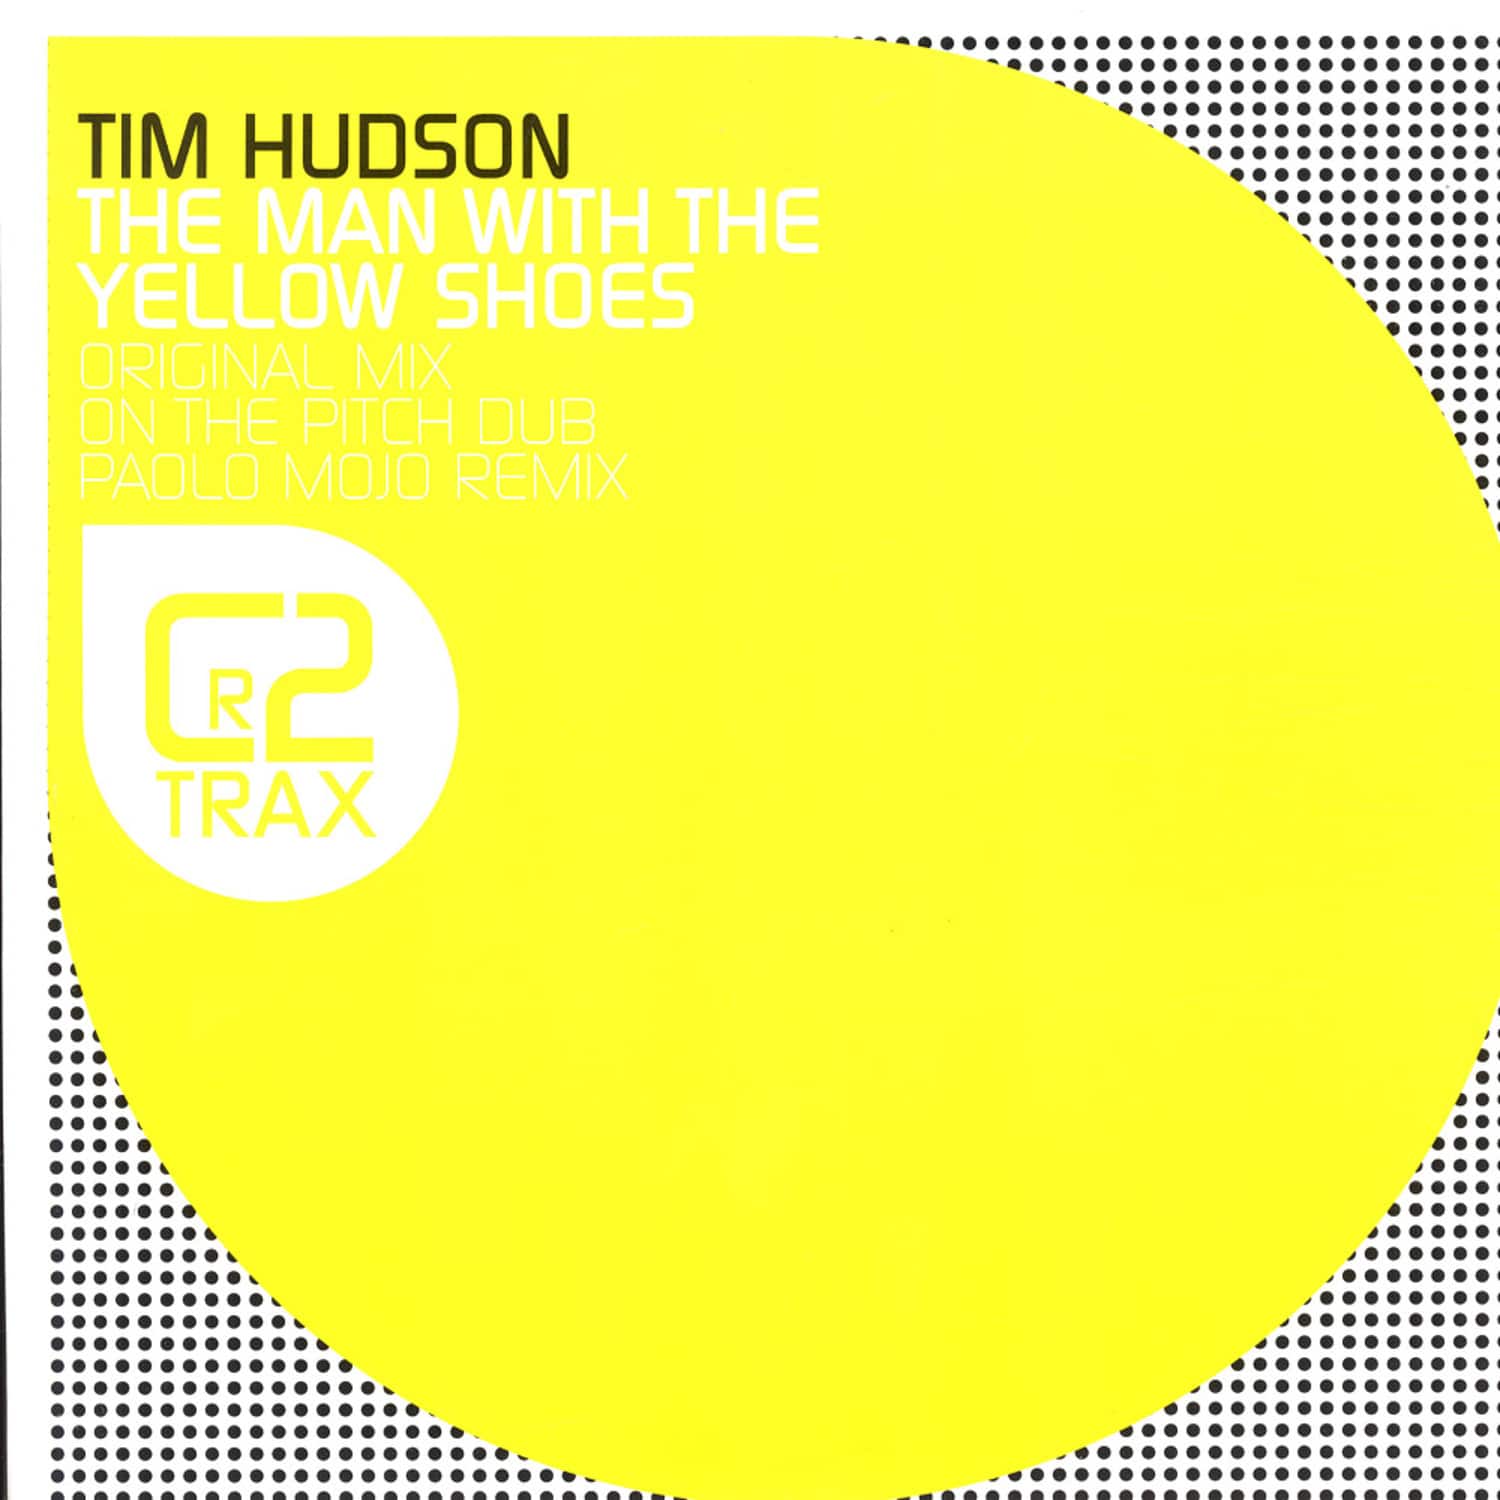 Tim Hudson - THE MAN WITH THE YELLOW SHOES